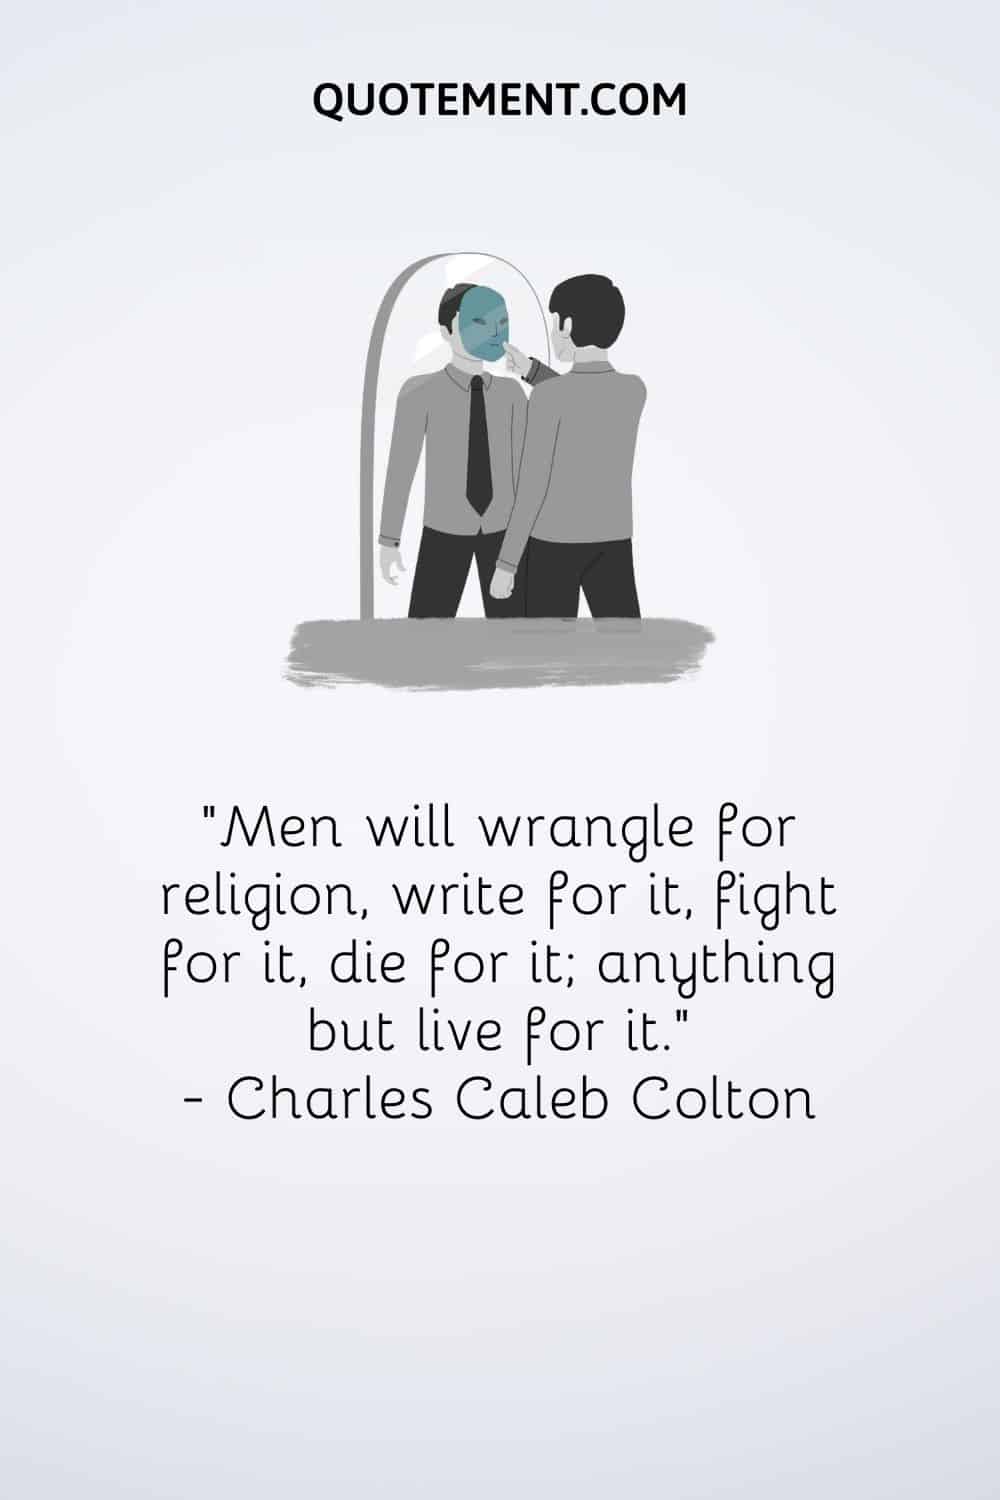 “Men will wrangle for religion, write for it, fight for it, die for it; anything but live for it.” — Charles Caleb Colton